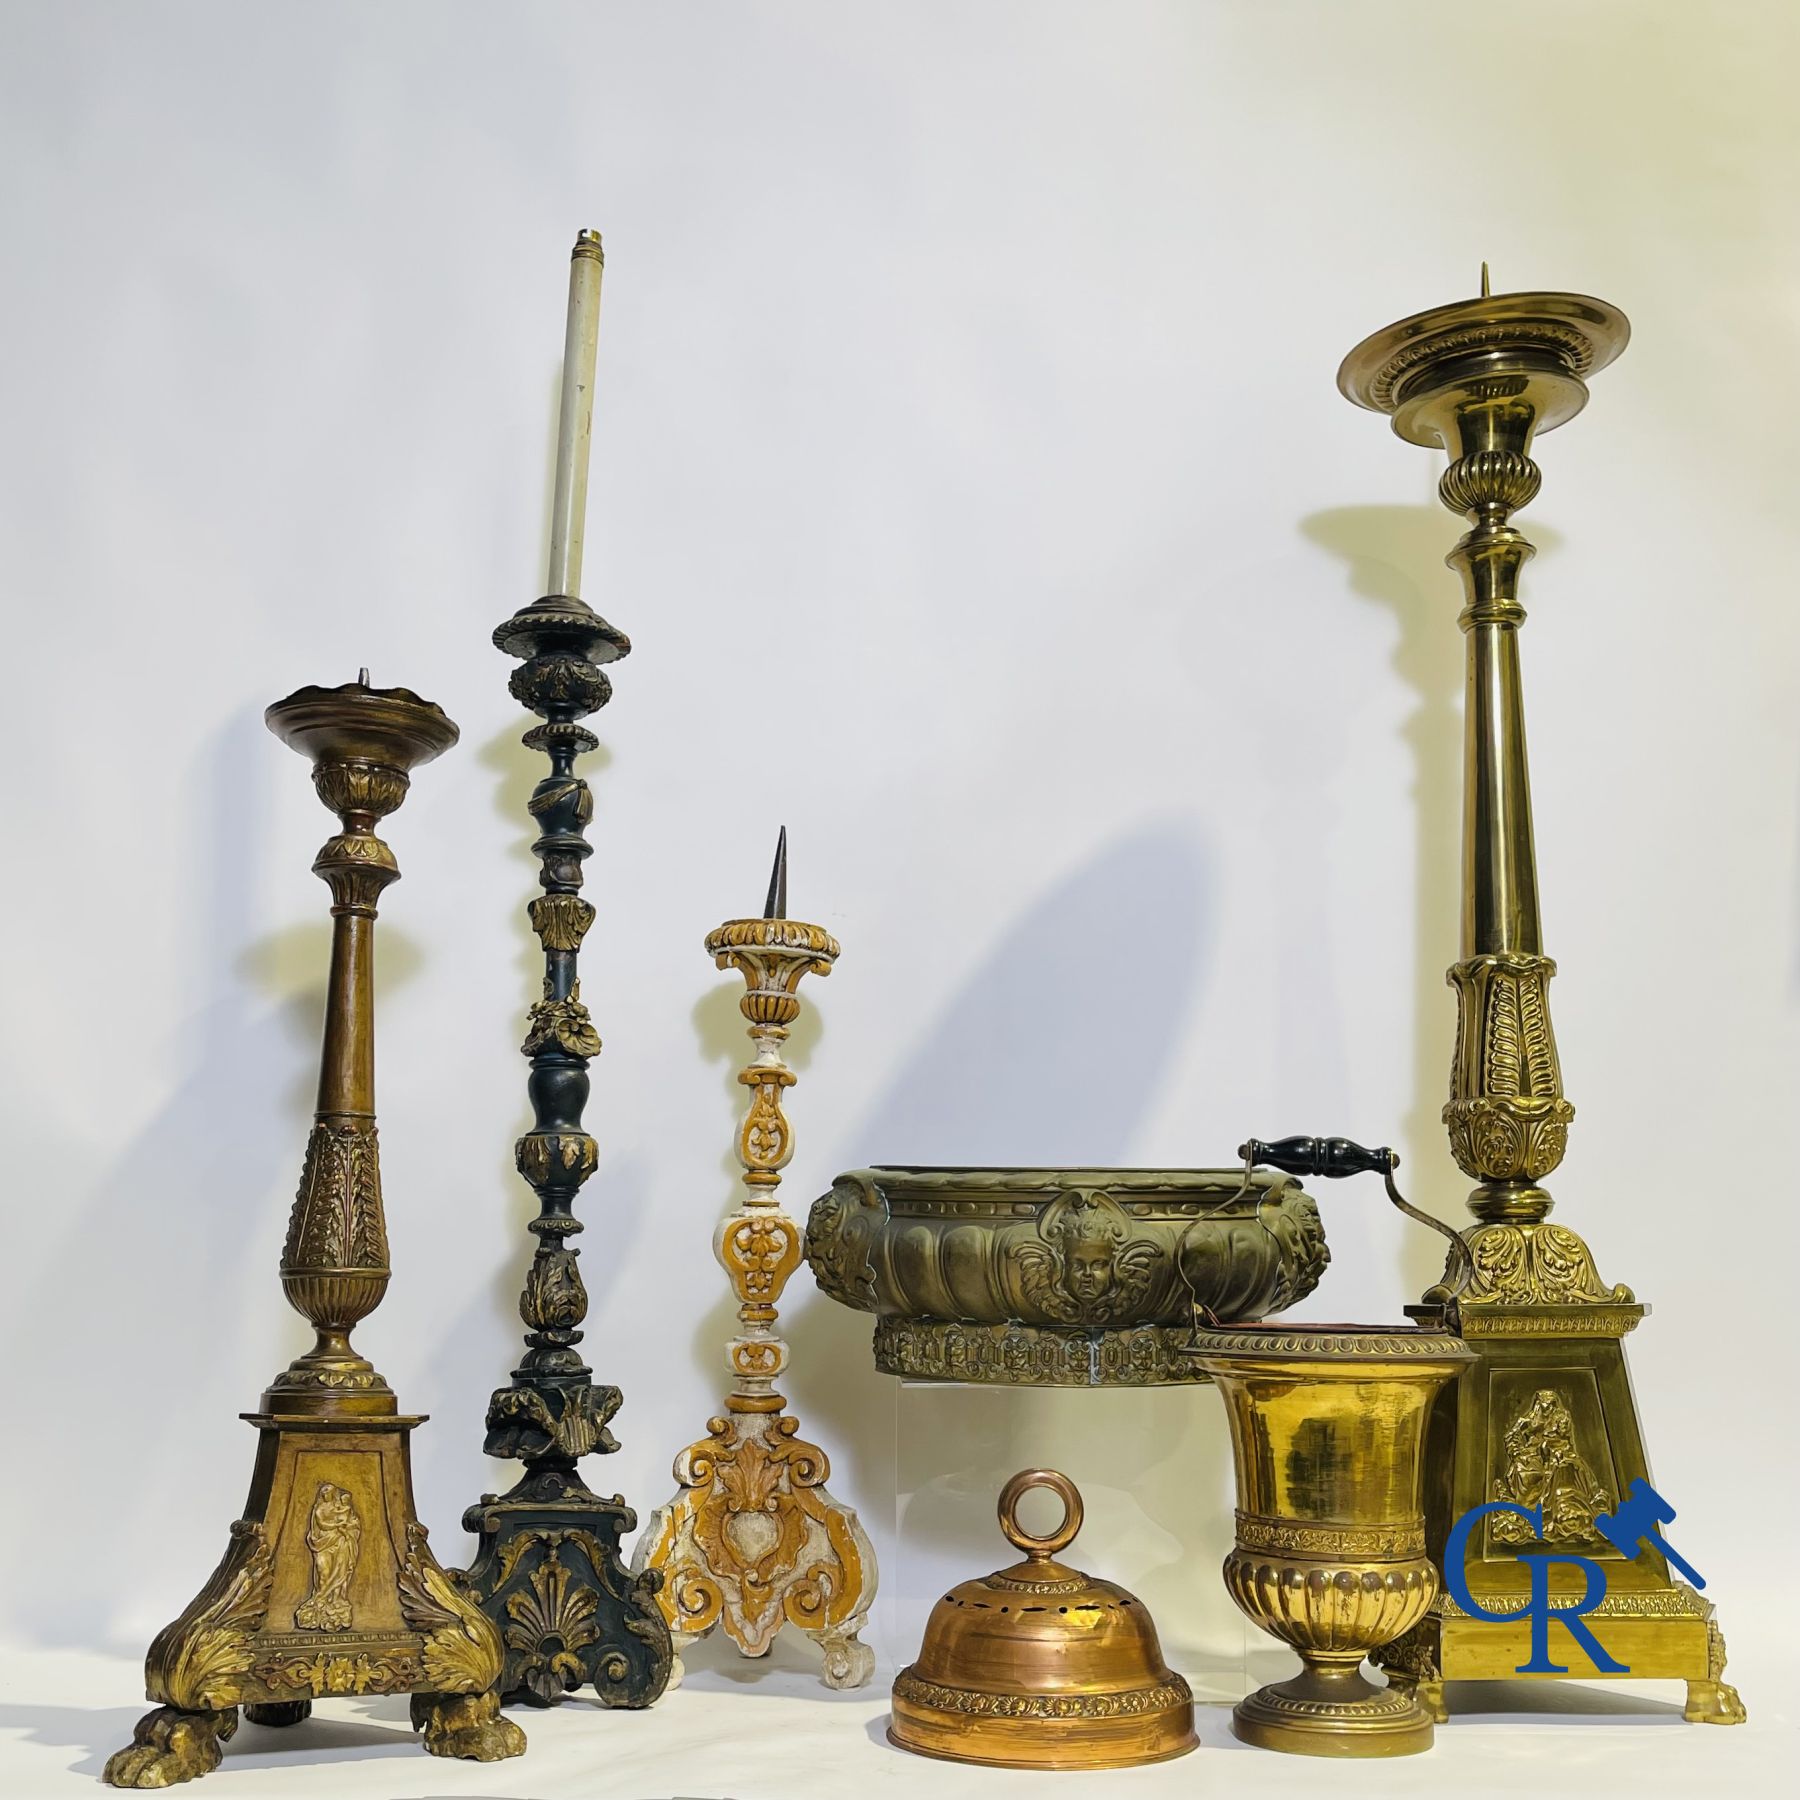 Lot of religious objects in wood and copper. 18th - 19th century. 4 candlesticks, a copper jardinier - Image 16 of 16